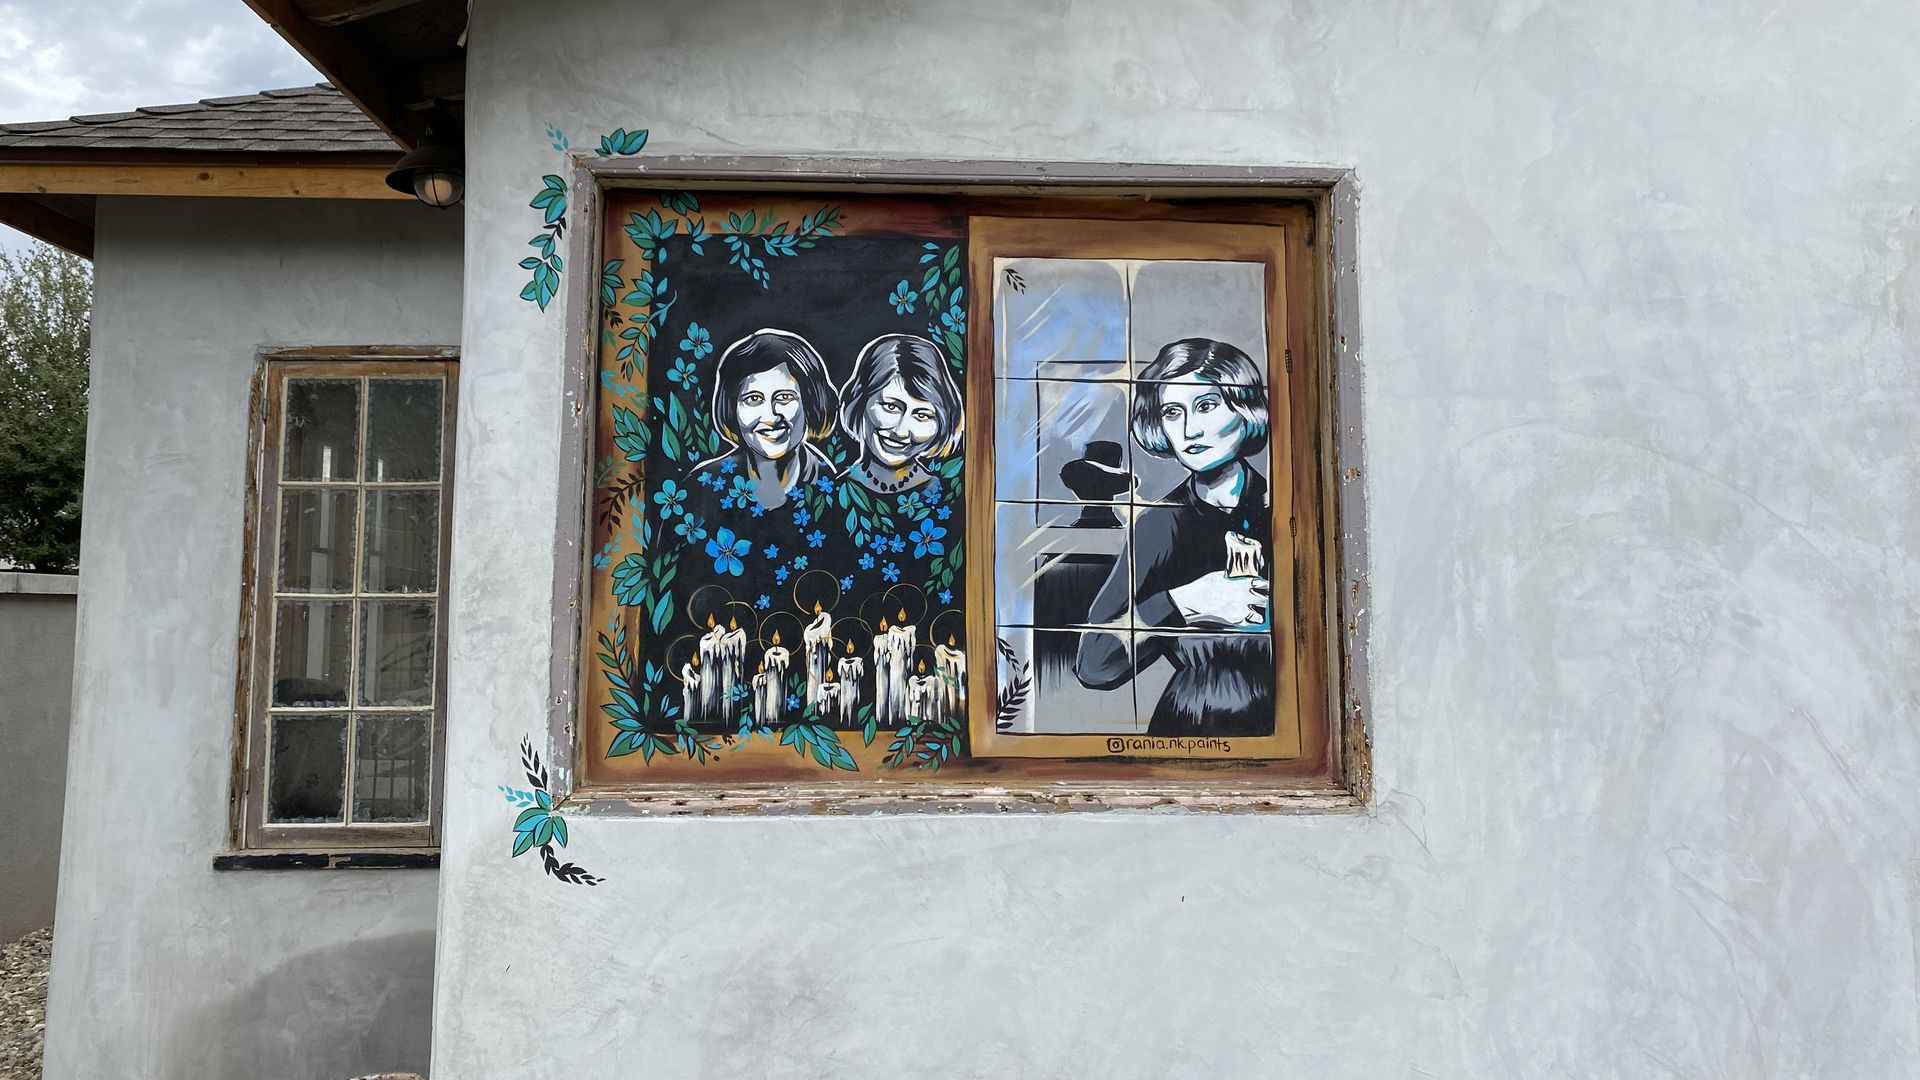 A window of a house with images of two women with candles in front of them on one side, and a woman with a mysterious man's silhouette behind her on the other side. 